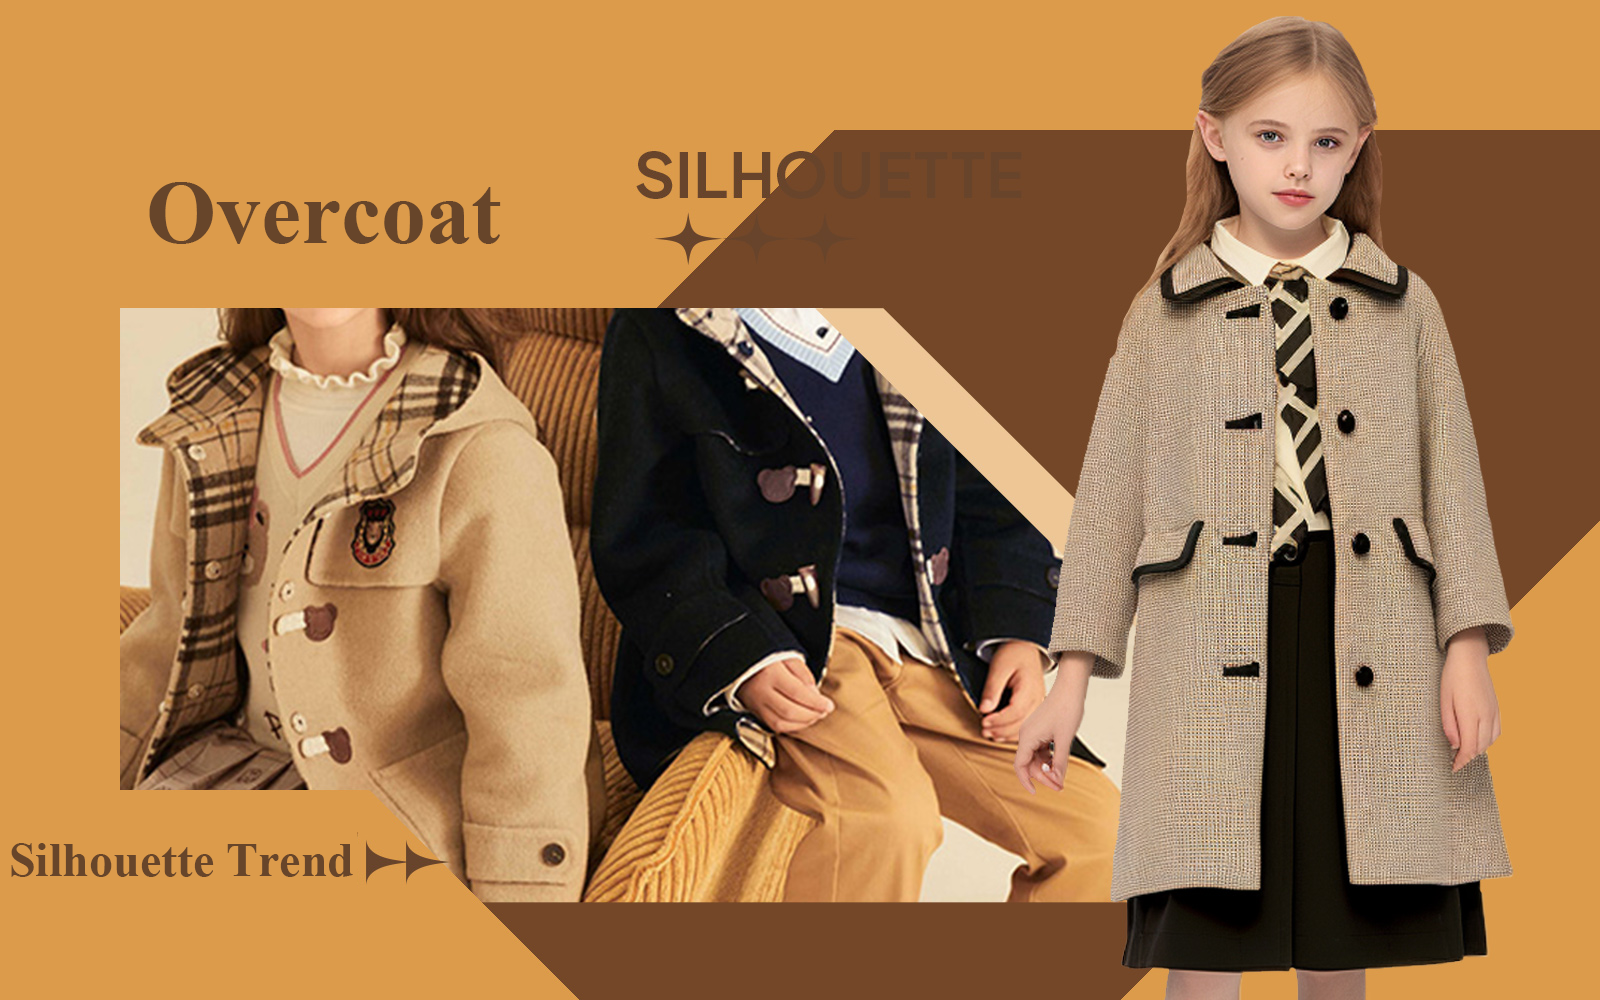 The Silhouette Trend for Kids' Overcoat